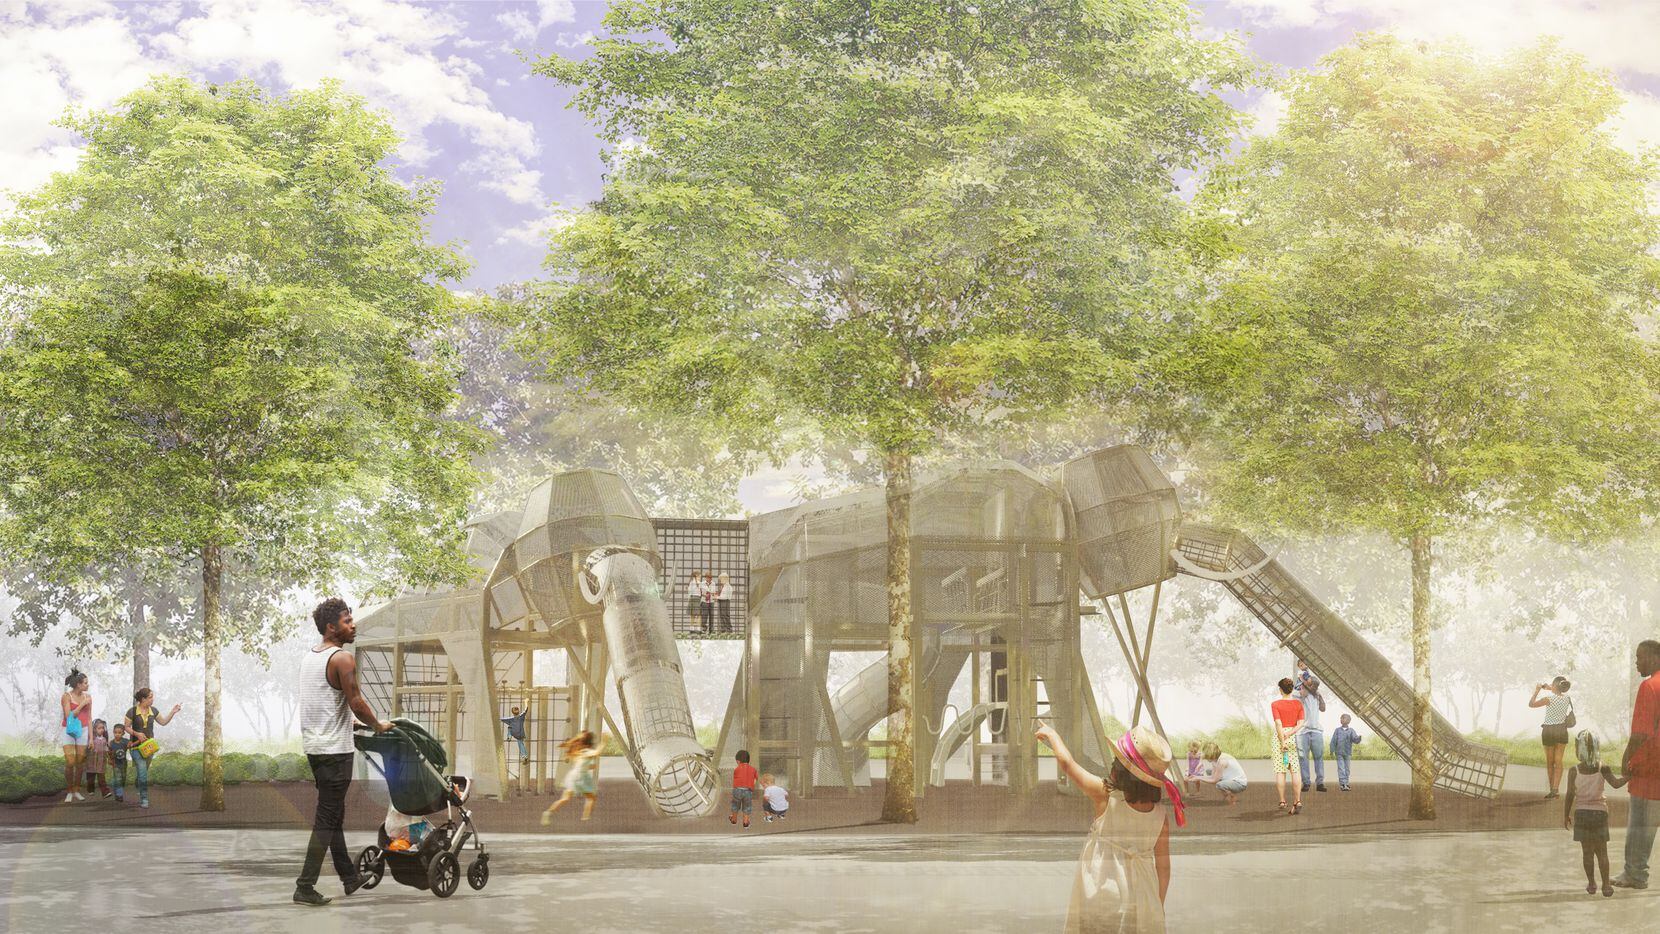 Landscape architect Christine Ten Eyck describes two of the play structures planned for the...